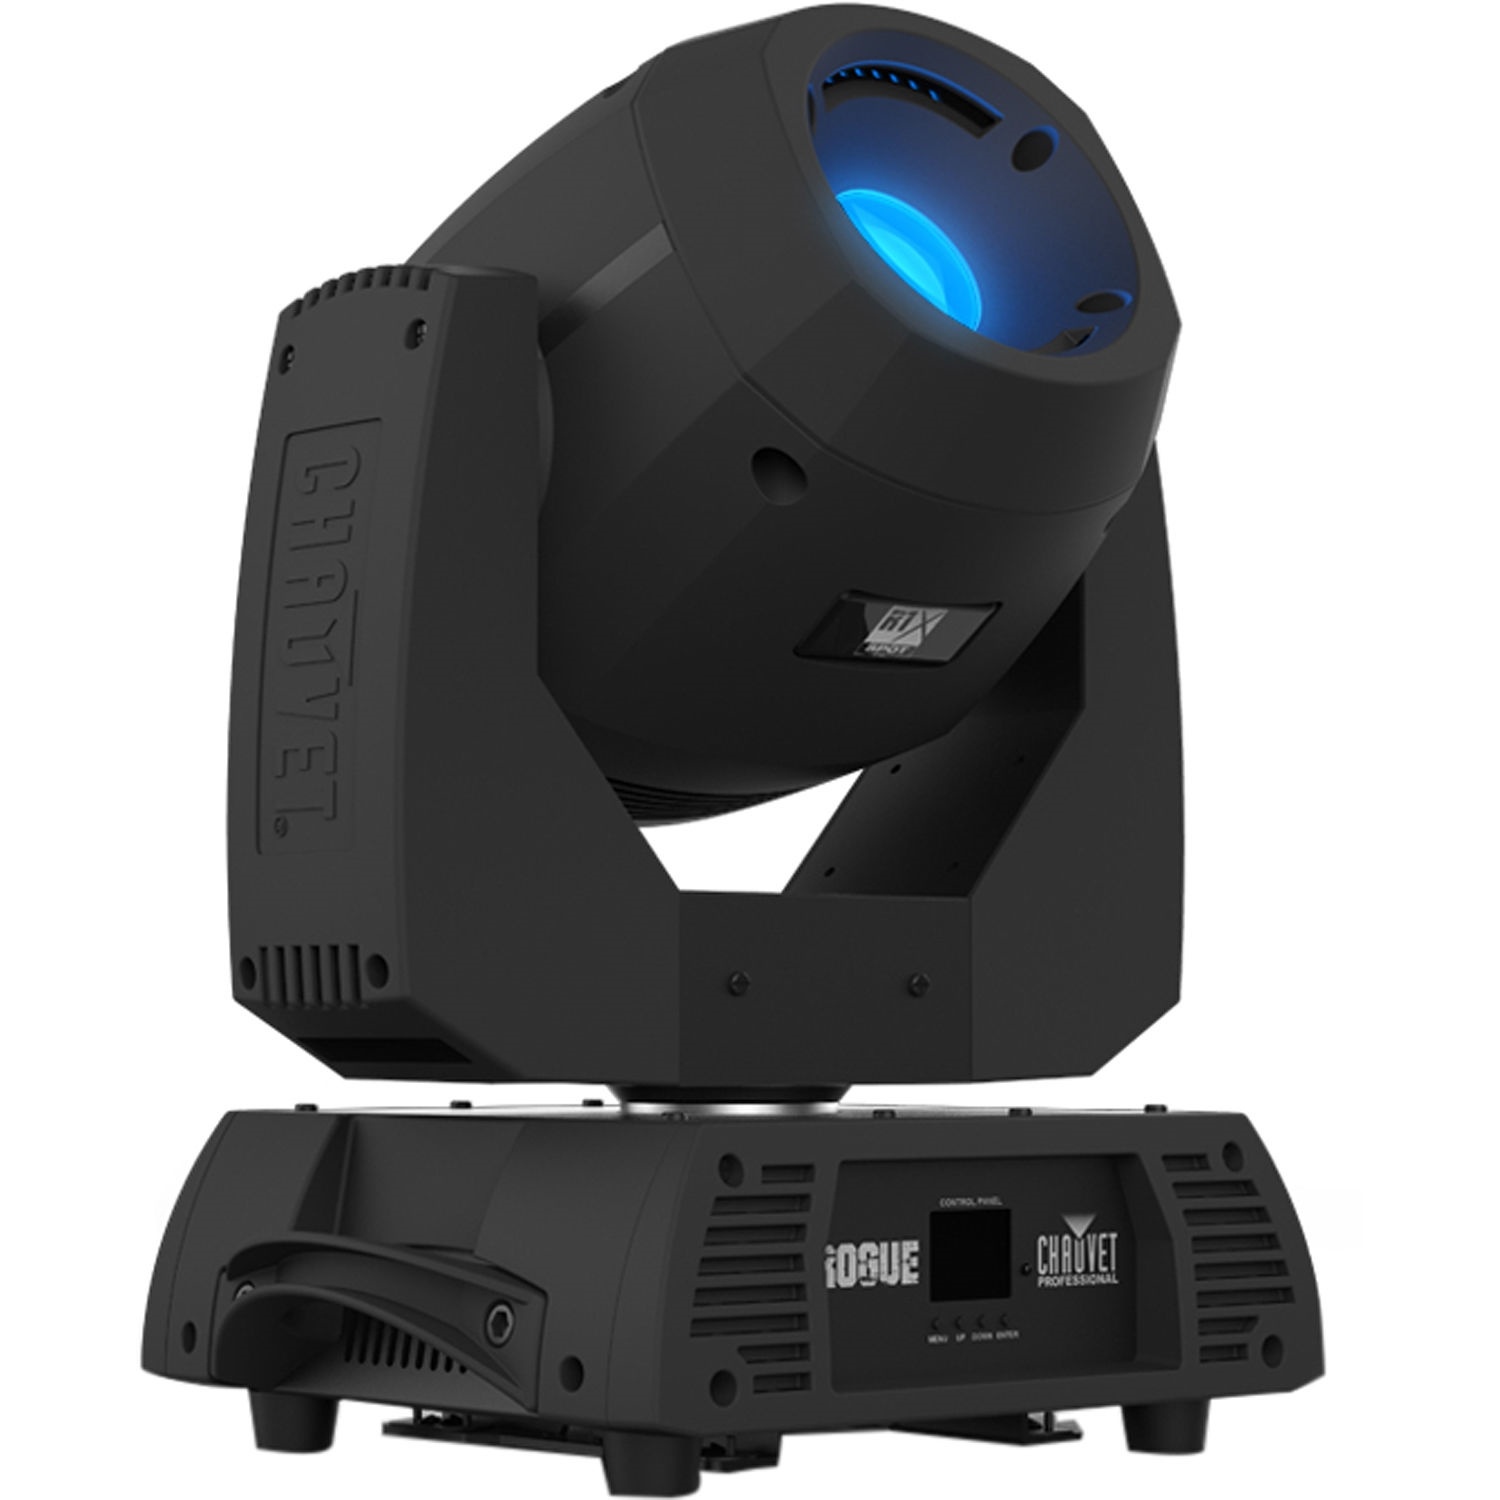 CHAUVET PROFESSIONAL Rogue R1X Spot - 170W LED Moving Head Light Fixture with Gobos